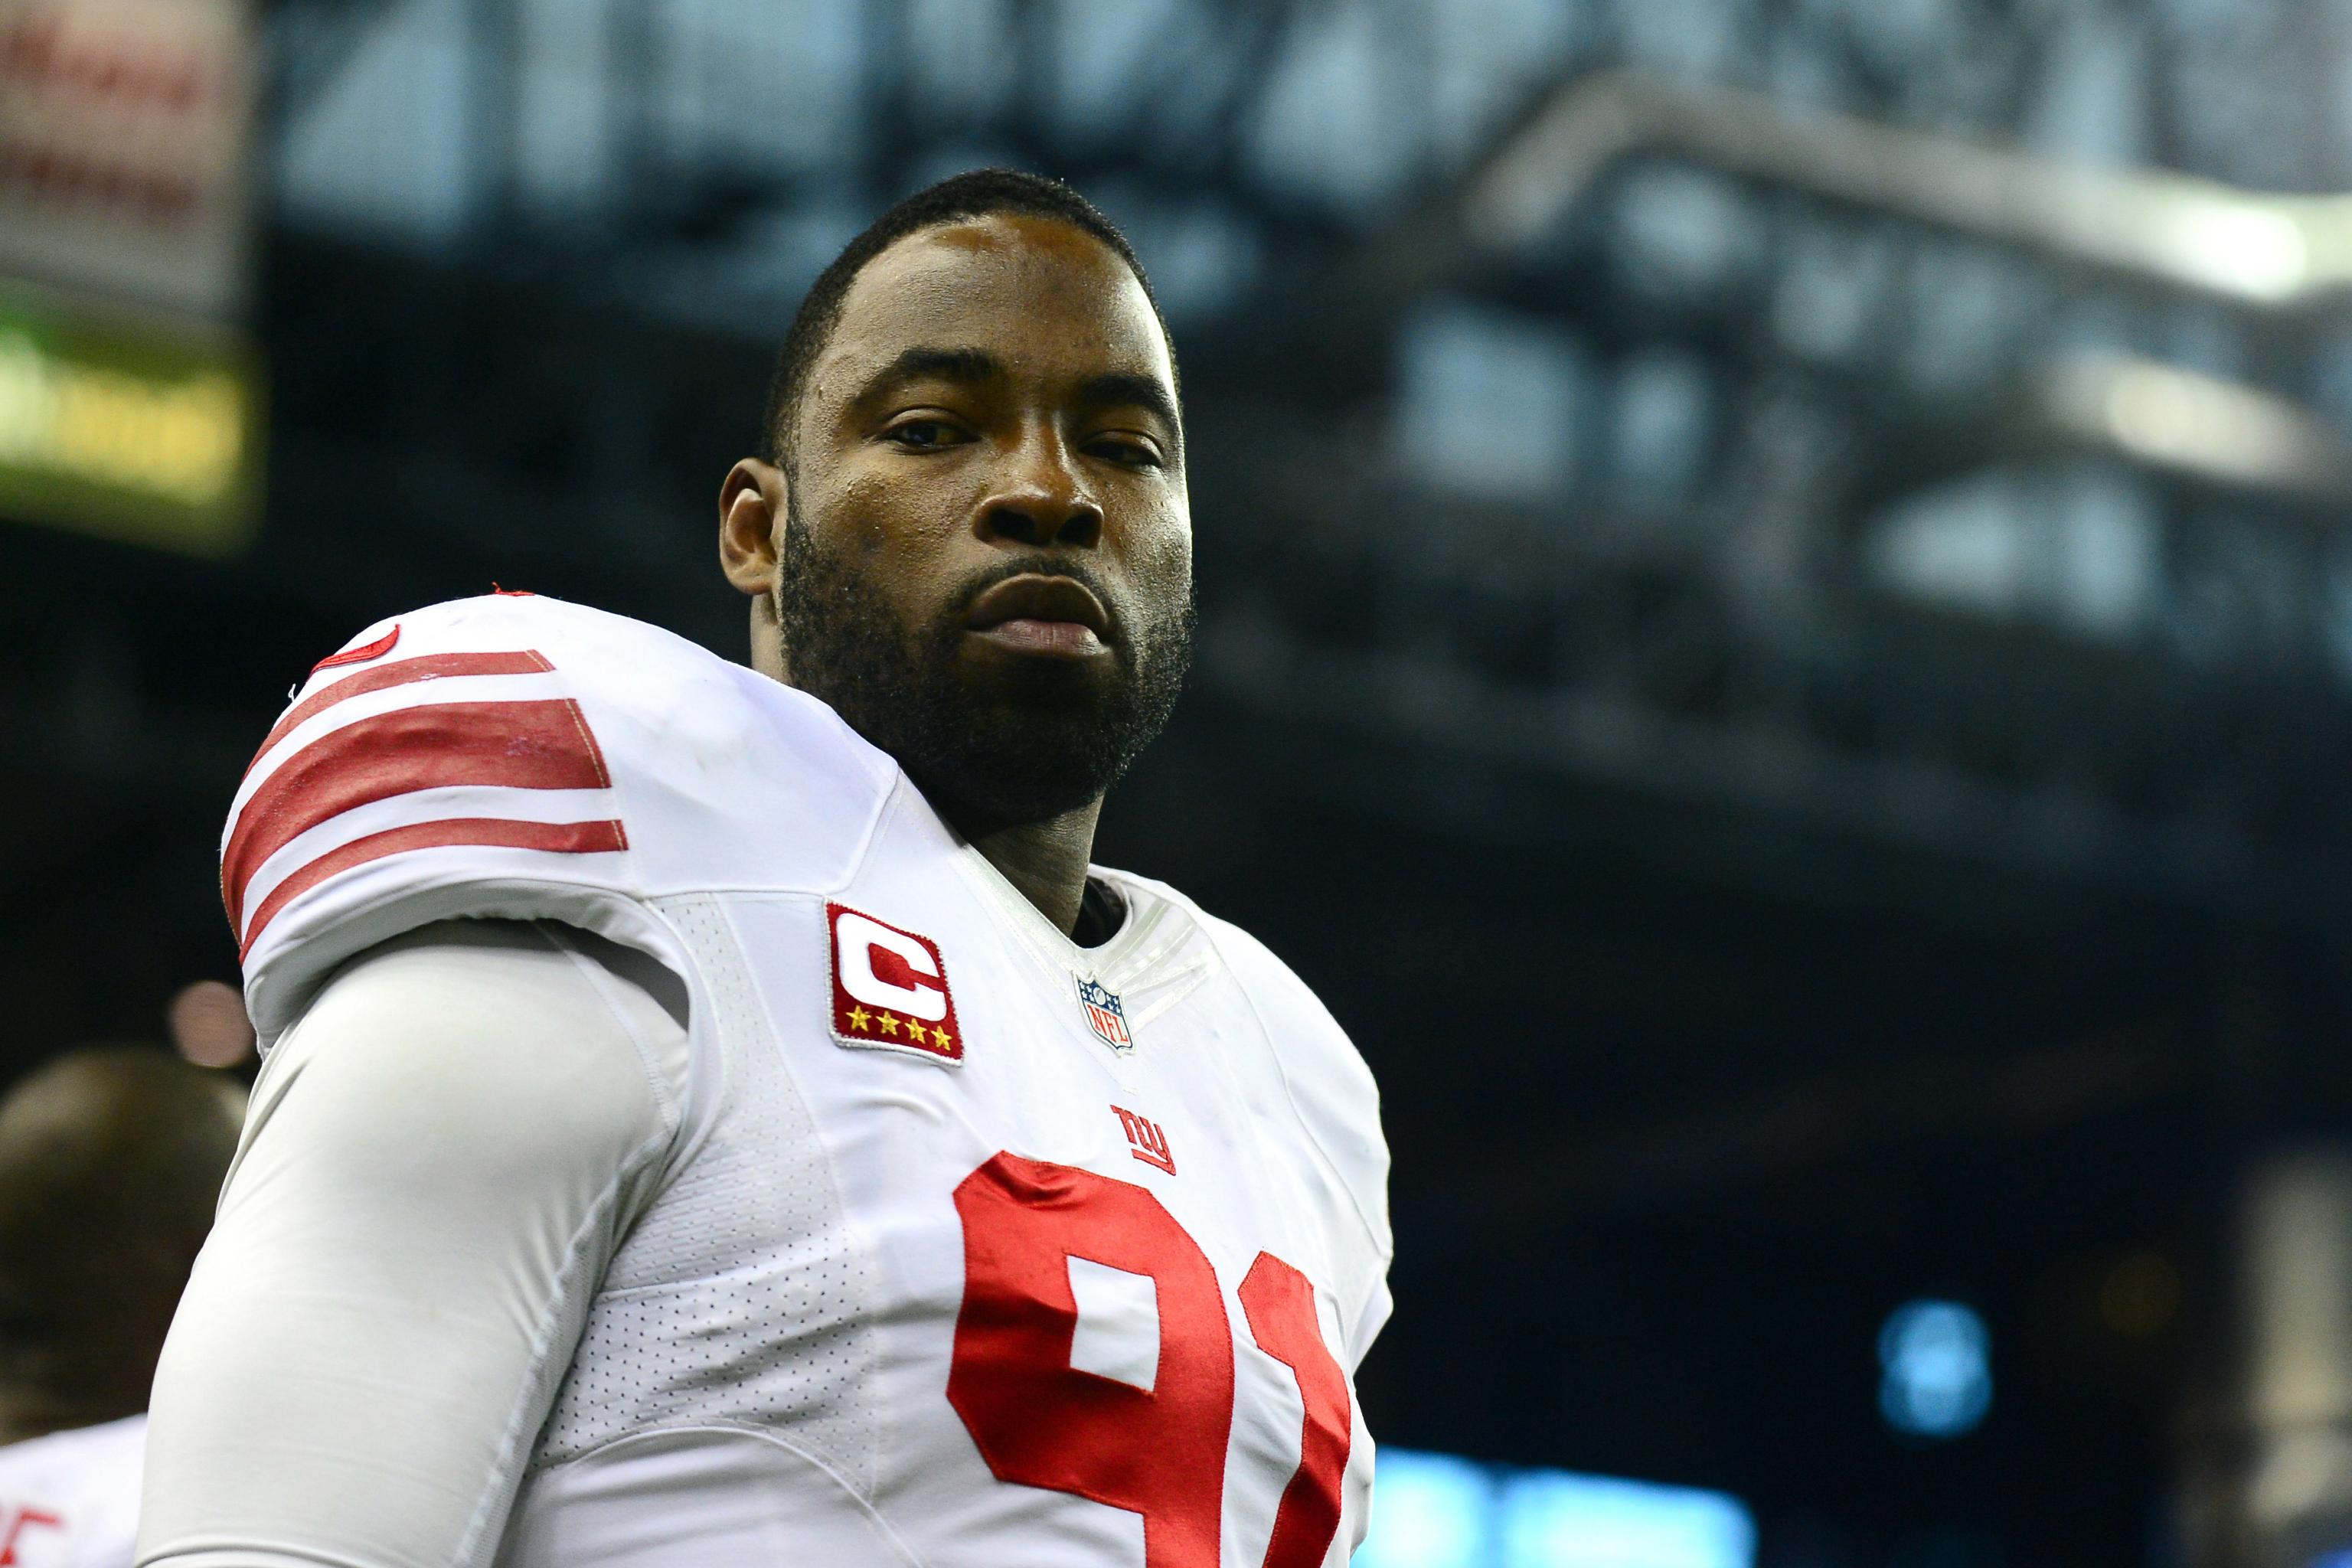 NY Giants defensive end Justin Tuck says Big Blue can win Super